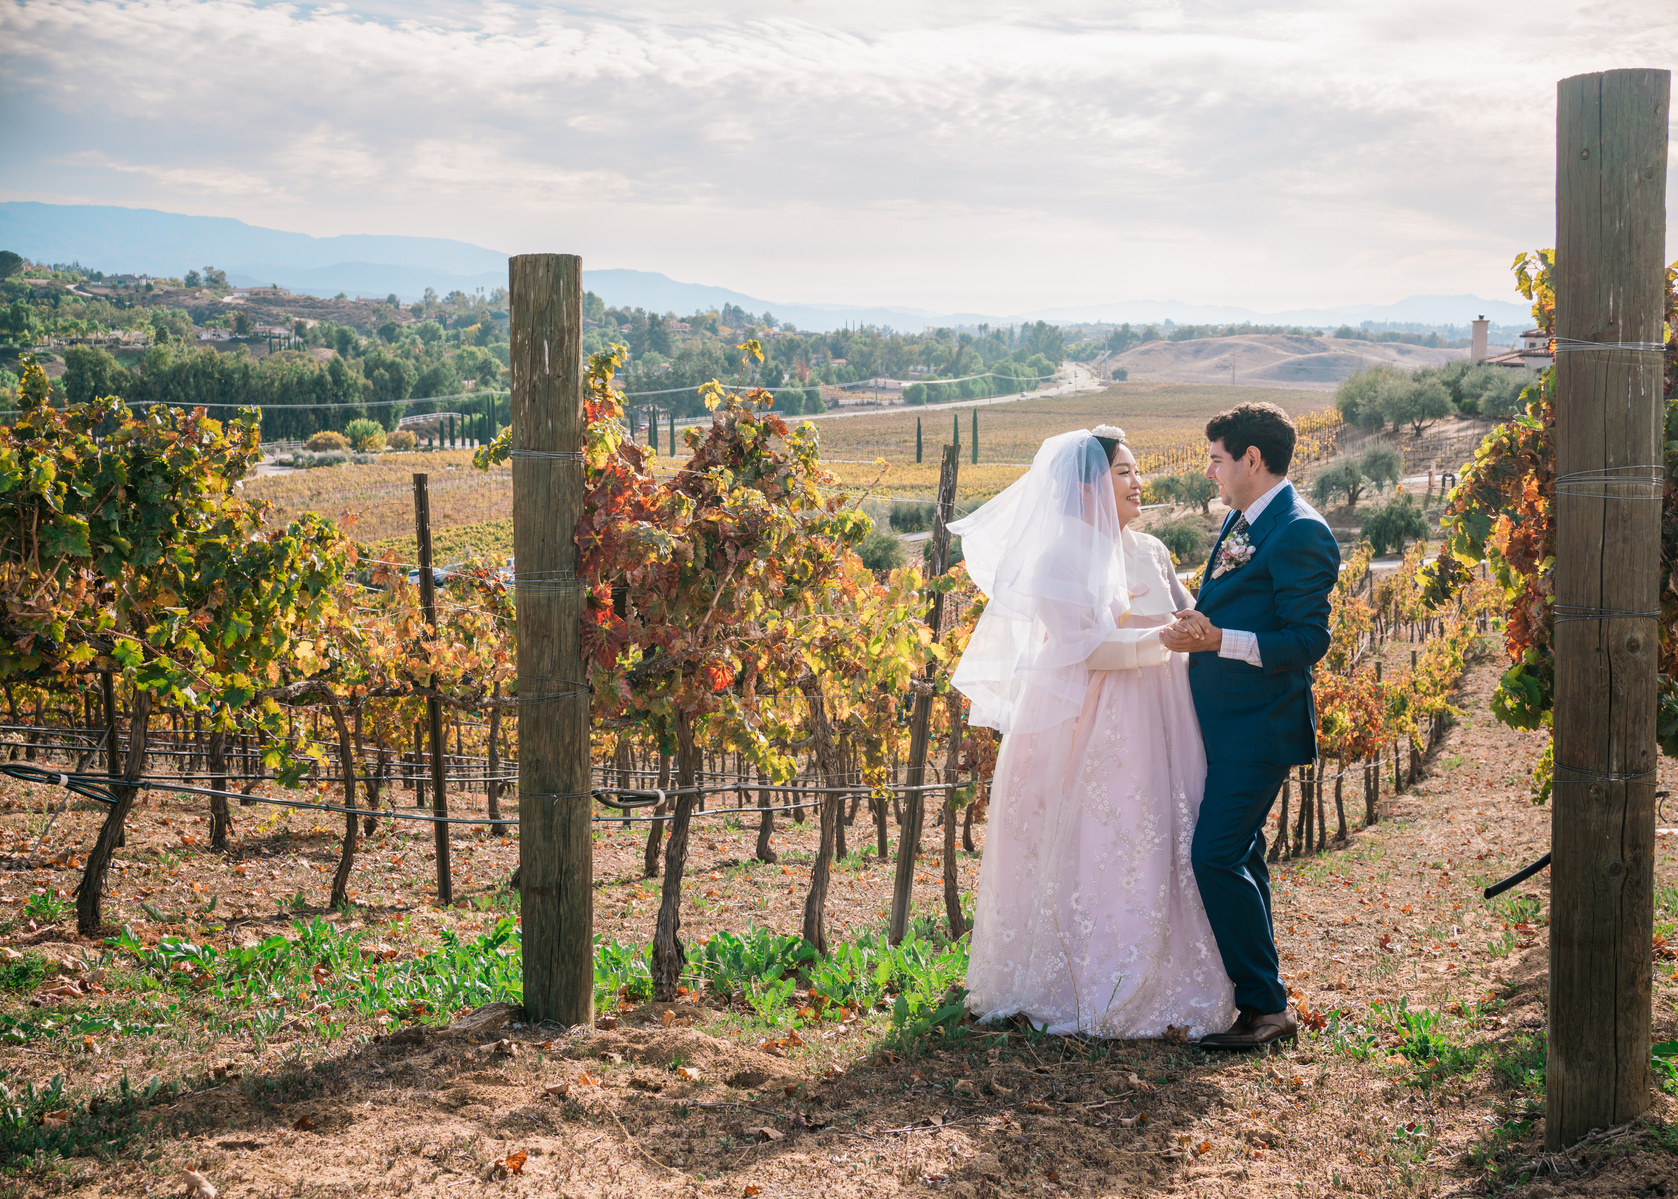 korean bride in her hanbok and jewish groom stand face to face among the vines in the vineyards as the rolling hills go on forever in the background temecula california wine country wedding photography